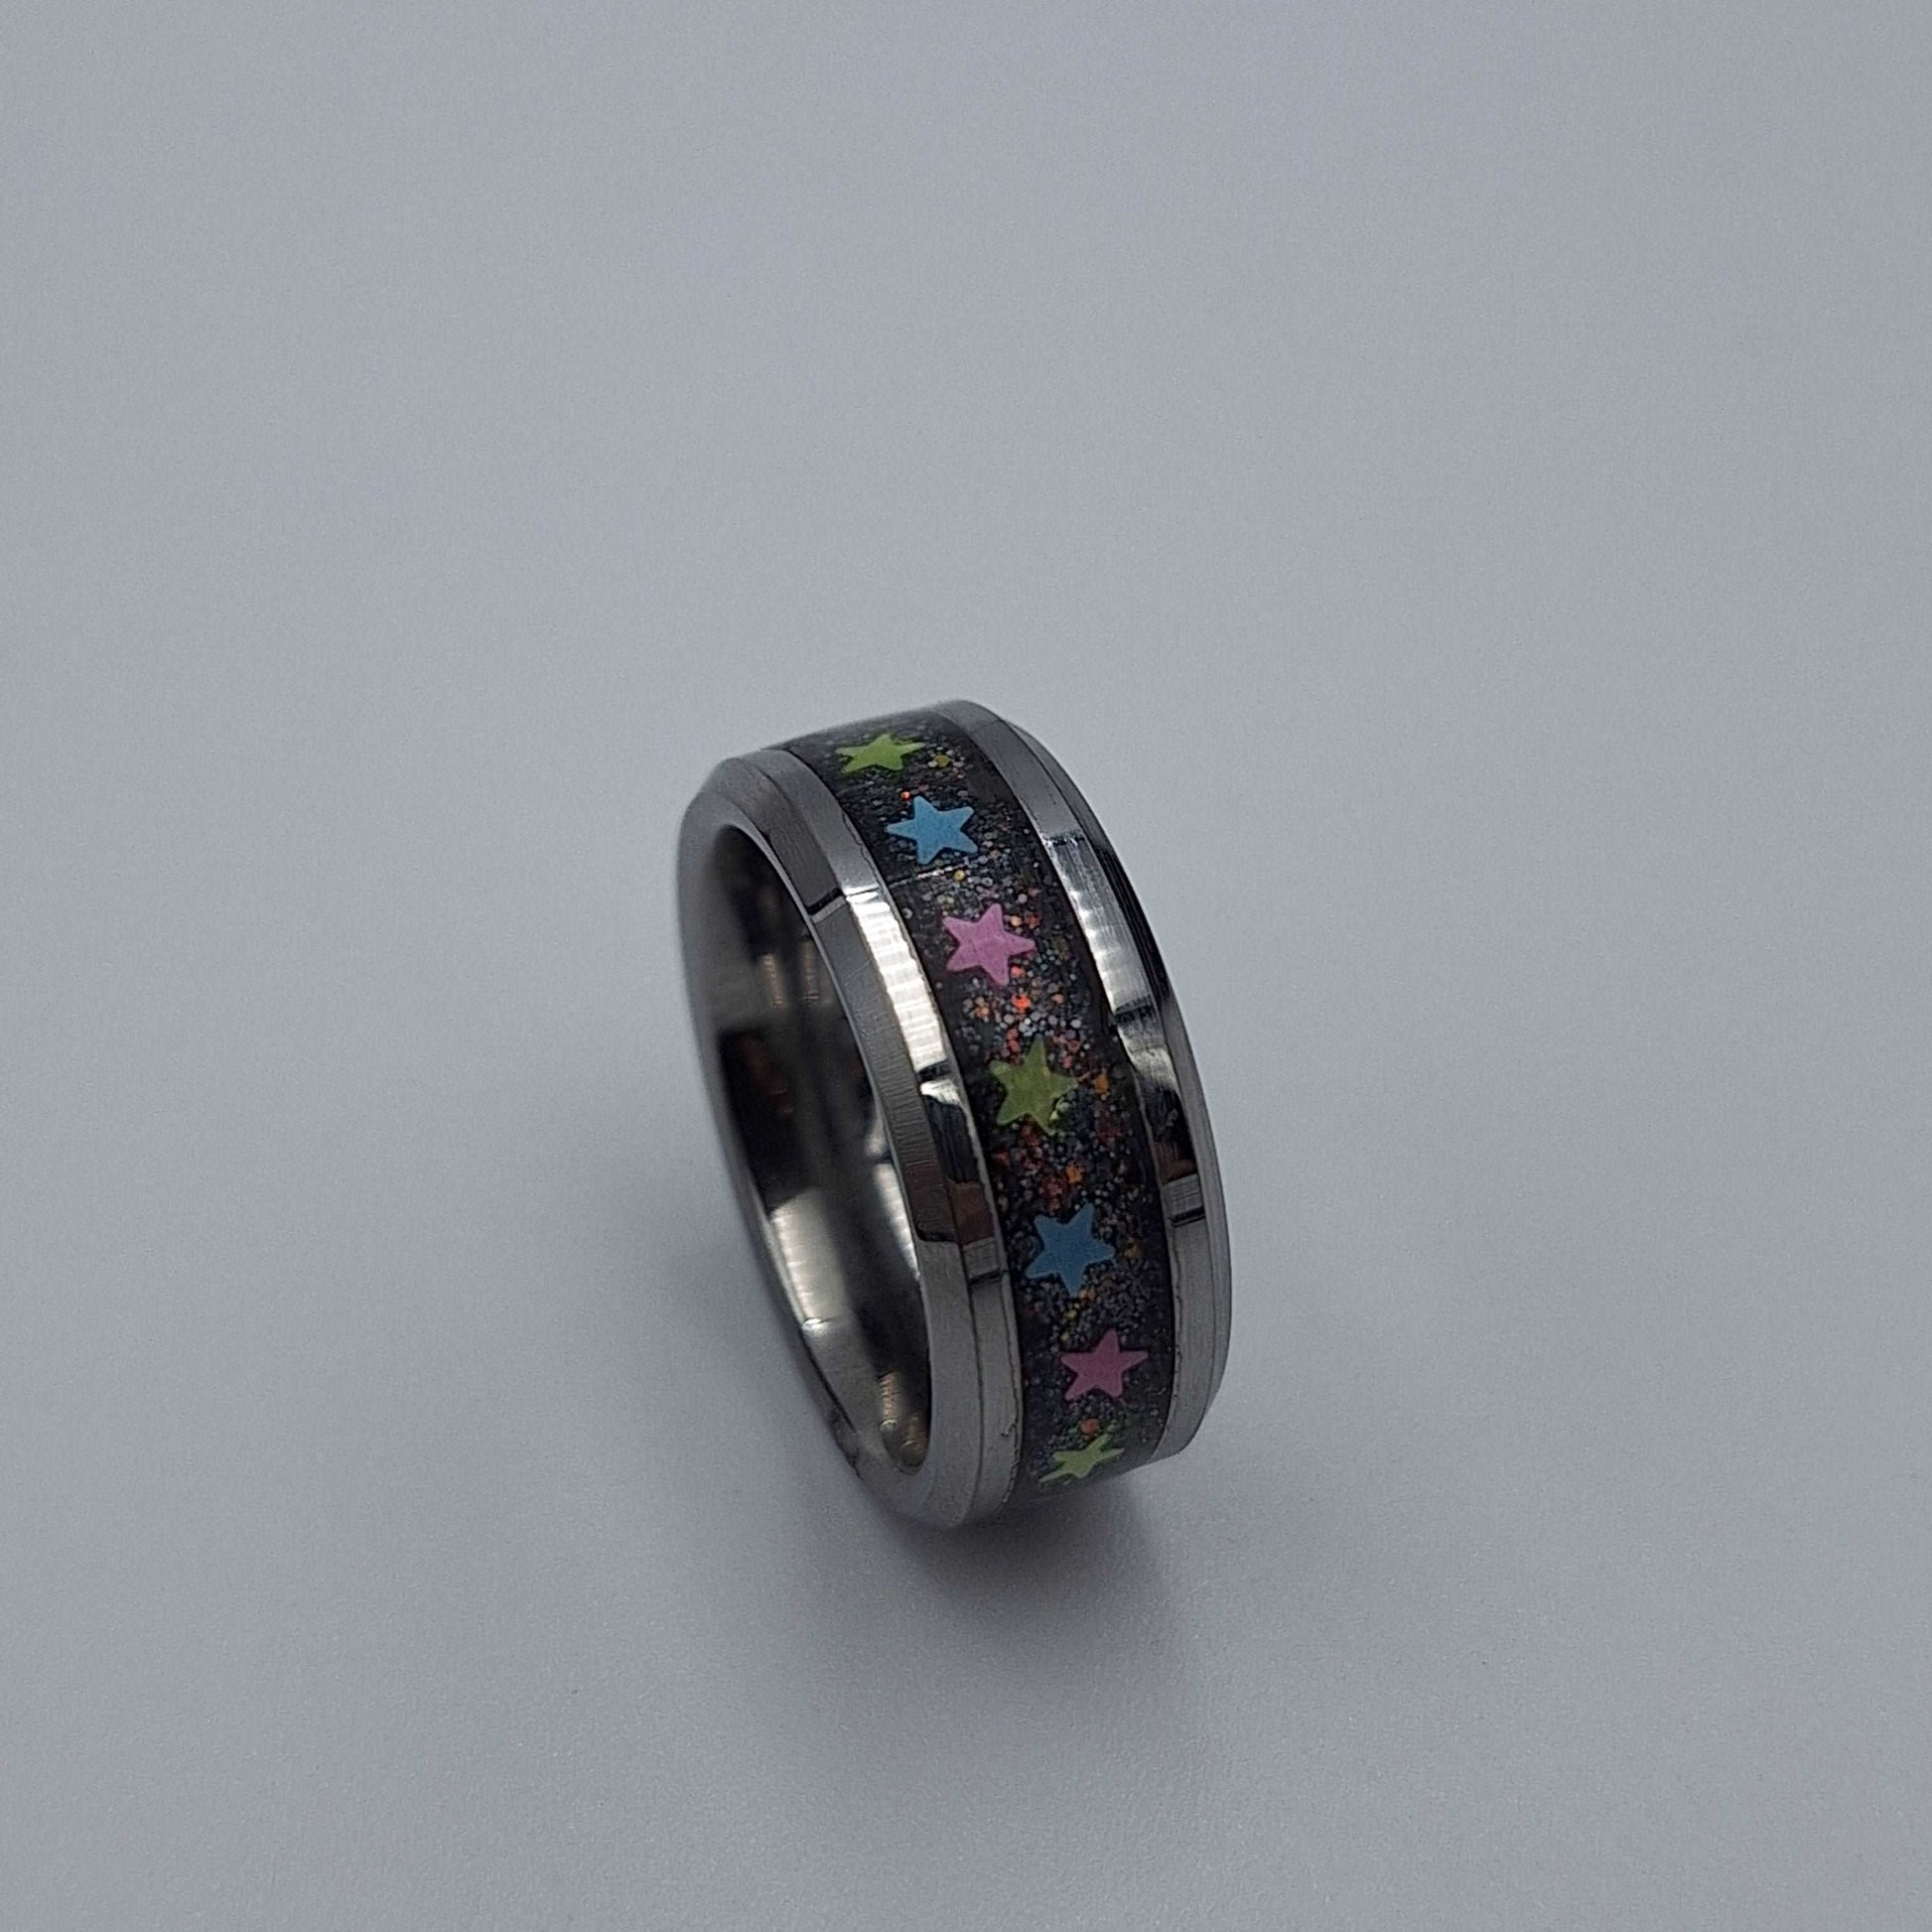 Tungsten Metal 8mm Ring With Glitter & Multicolored Stars - Size 6